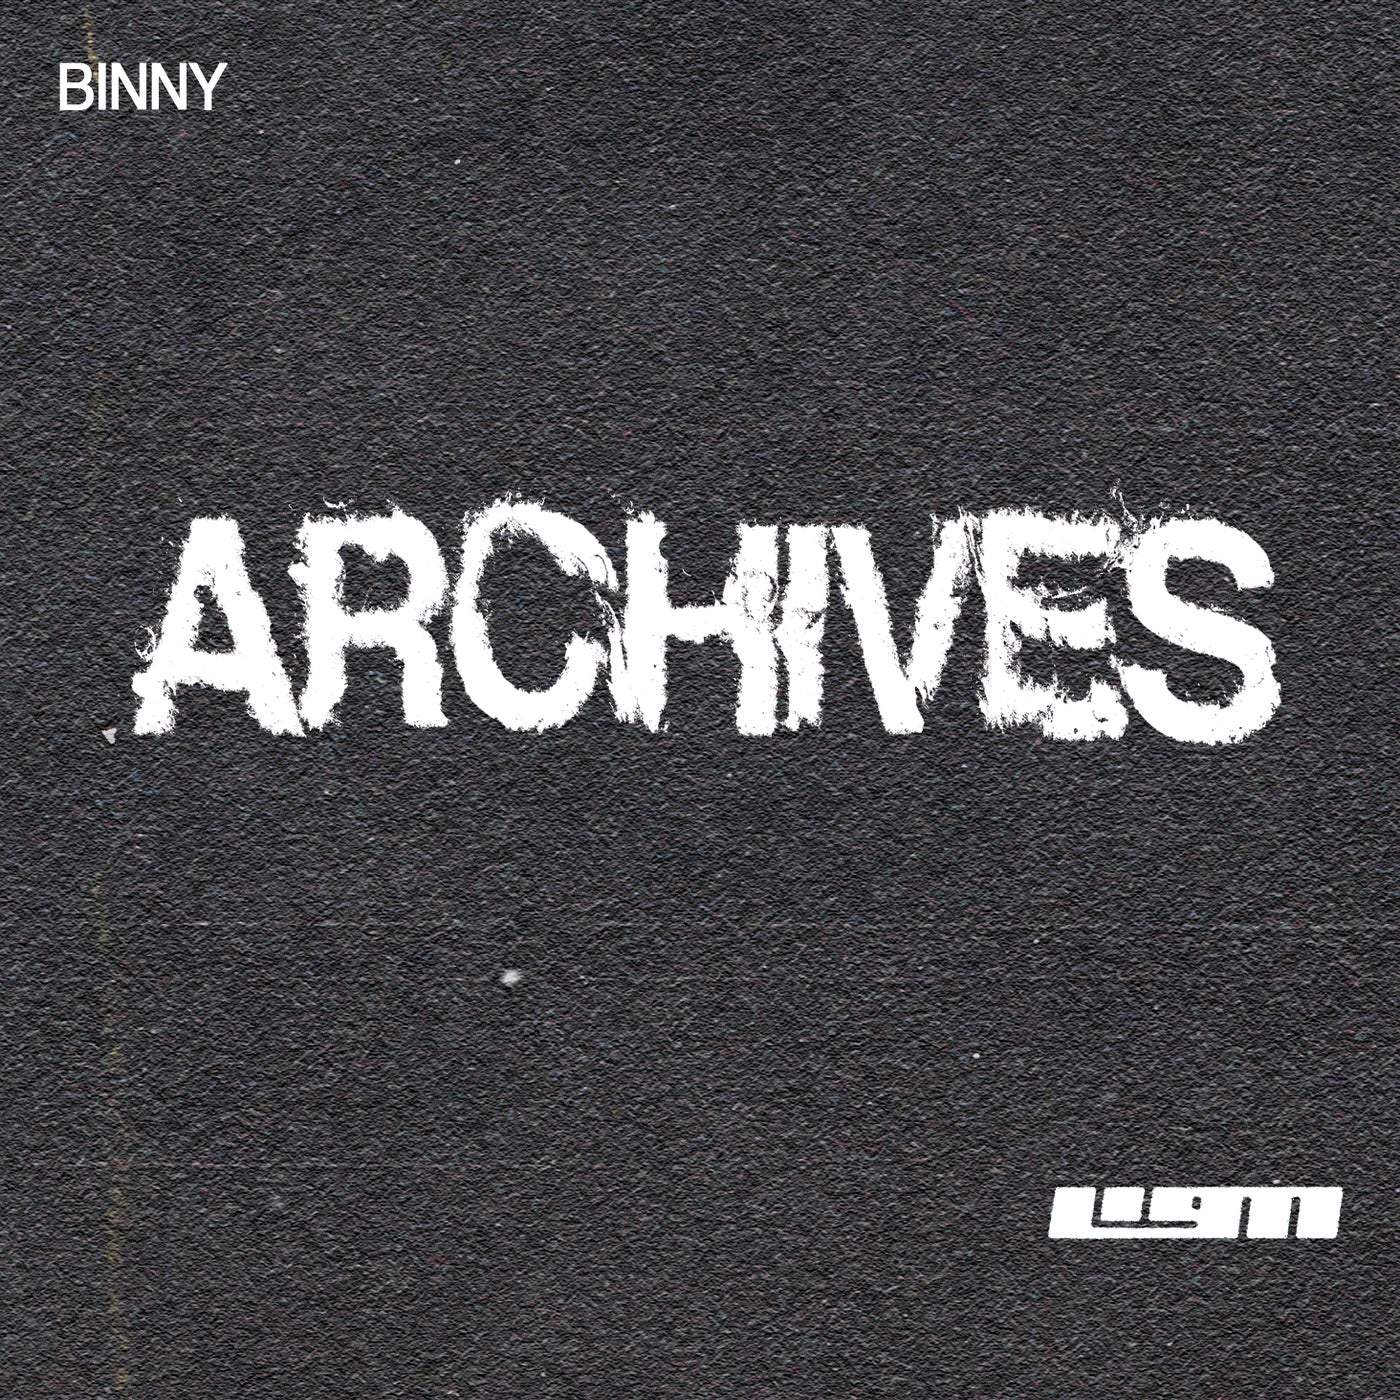 Download Binny - Archives on Electrobuzz